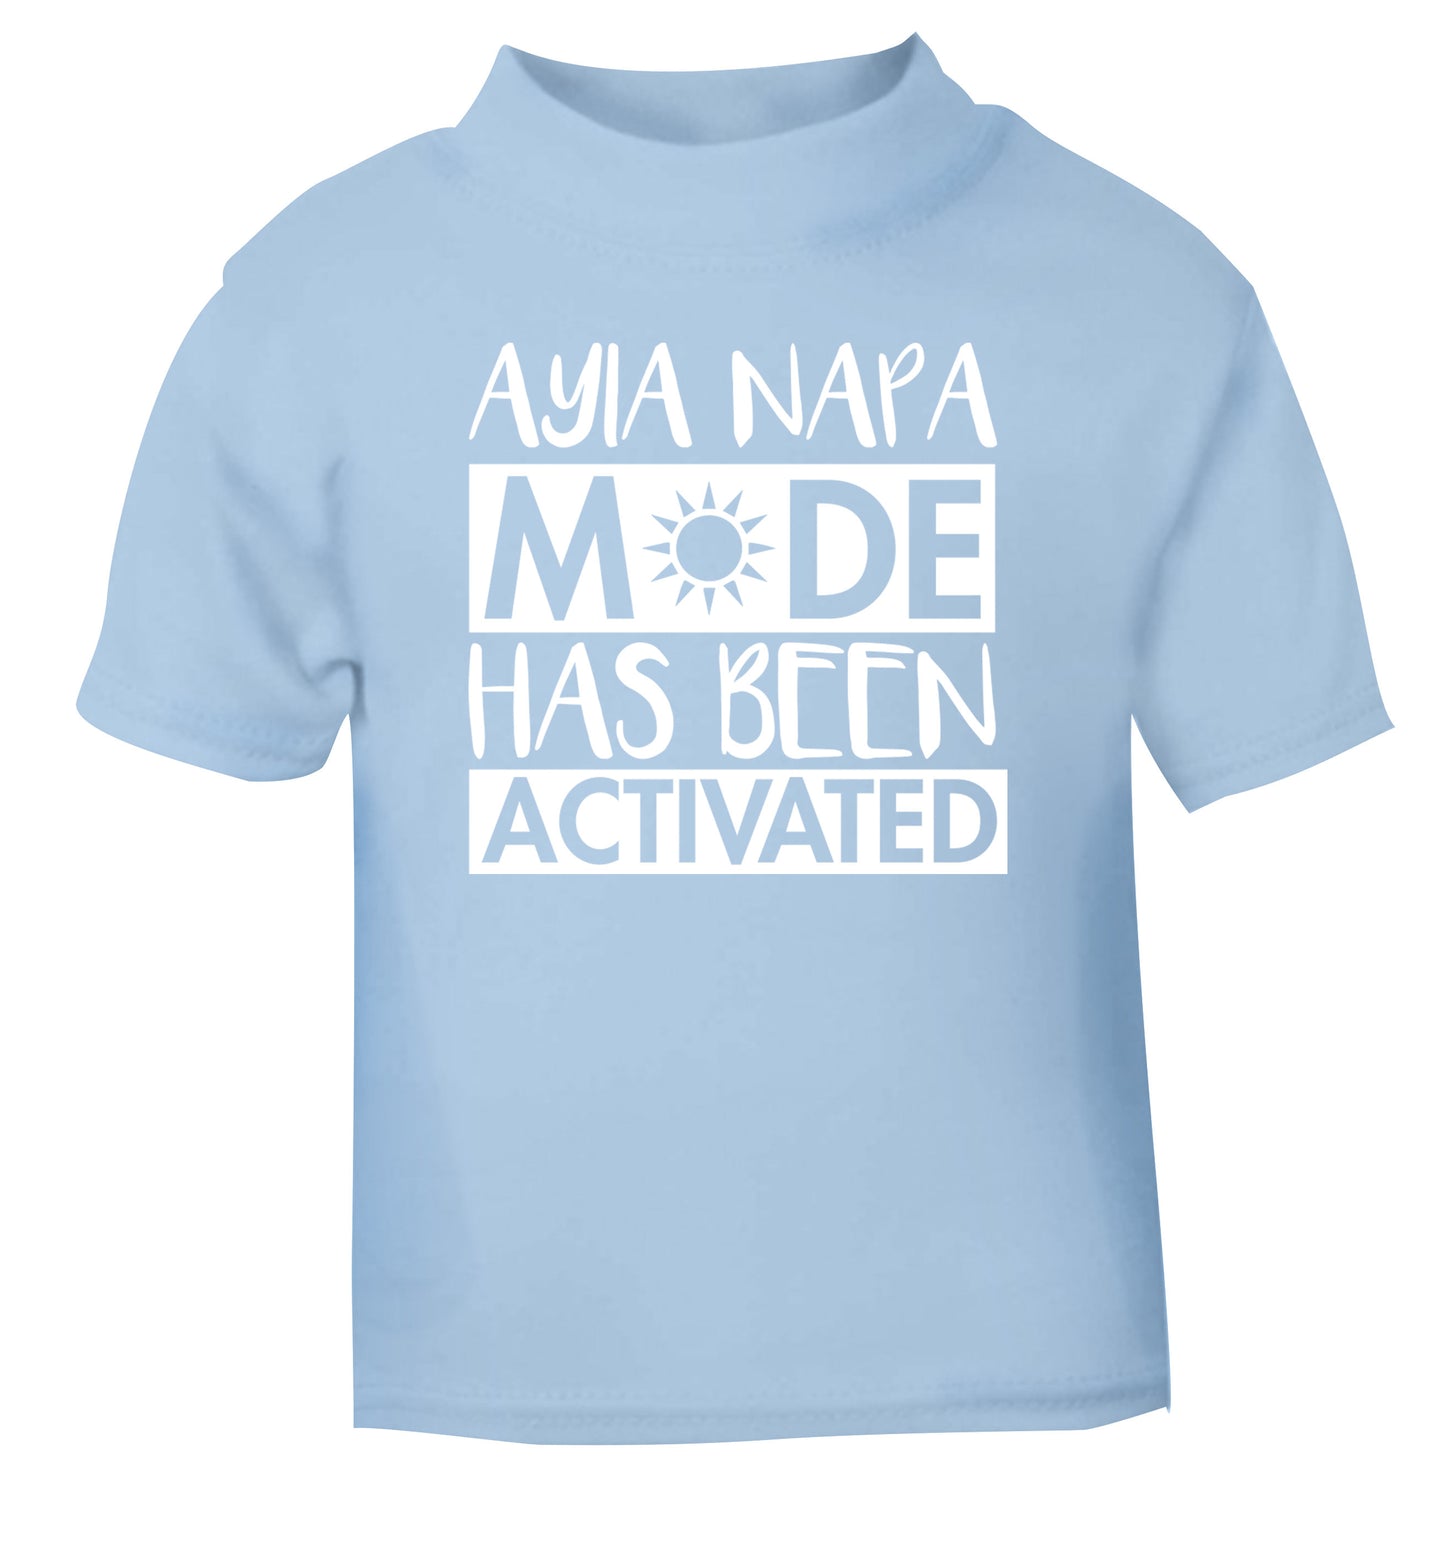 Aiya Napa mode has been activated light blue Baby Toddler Tshirt 2 Years